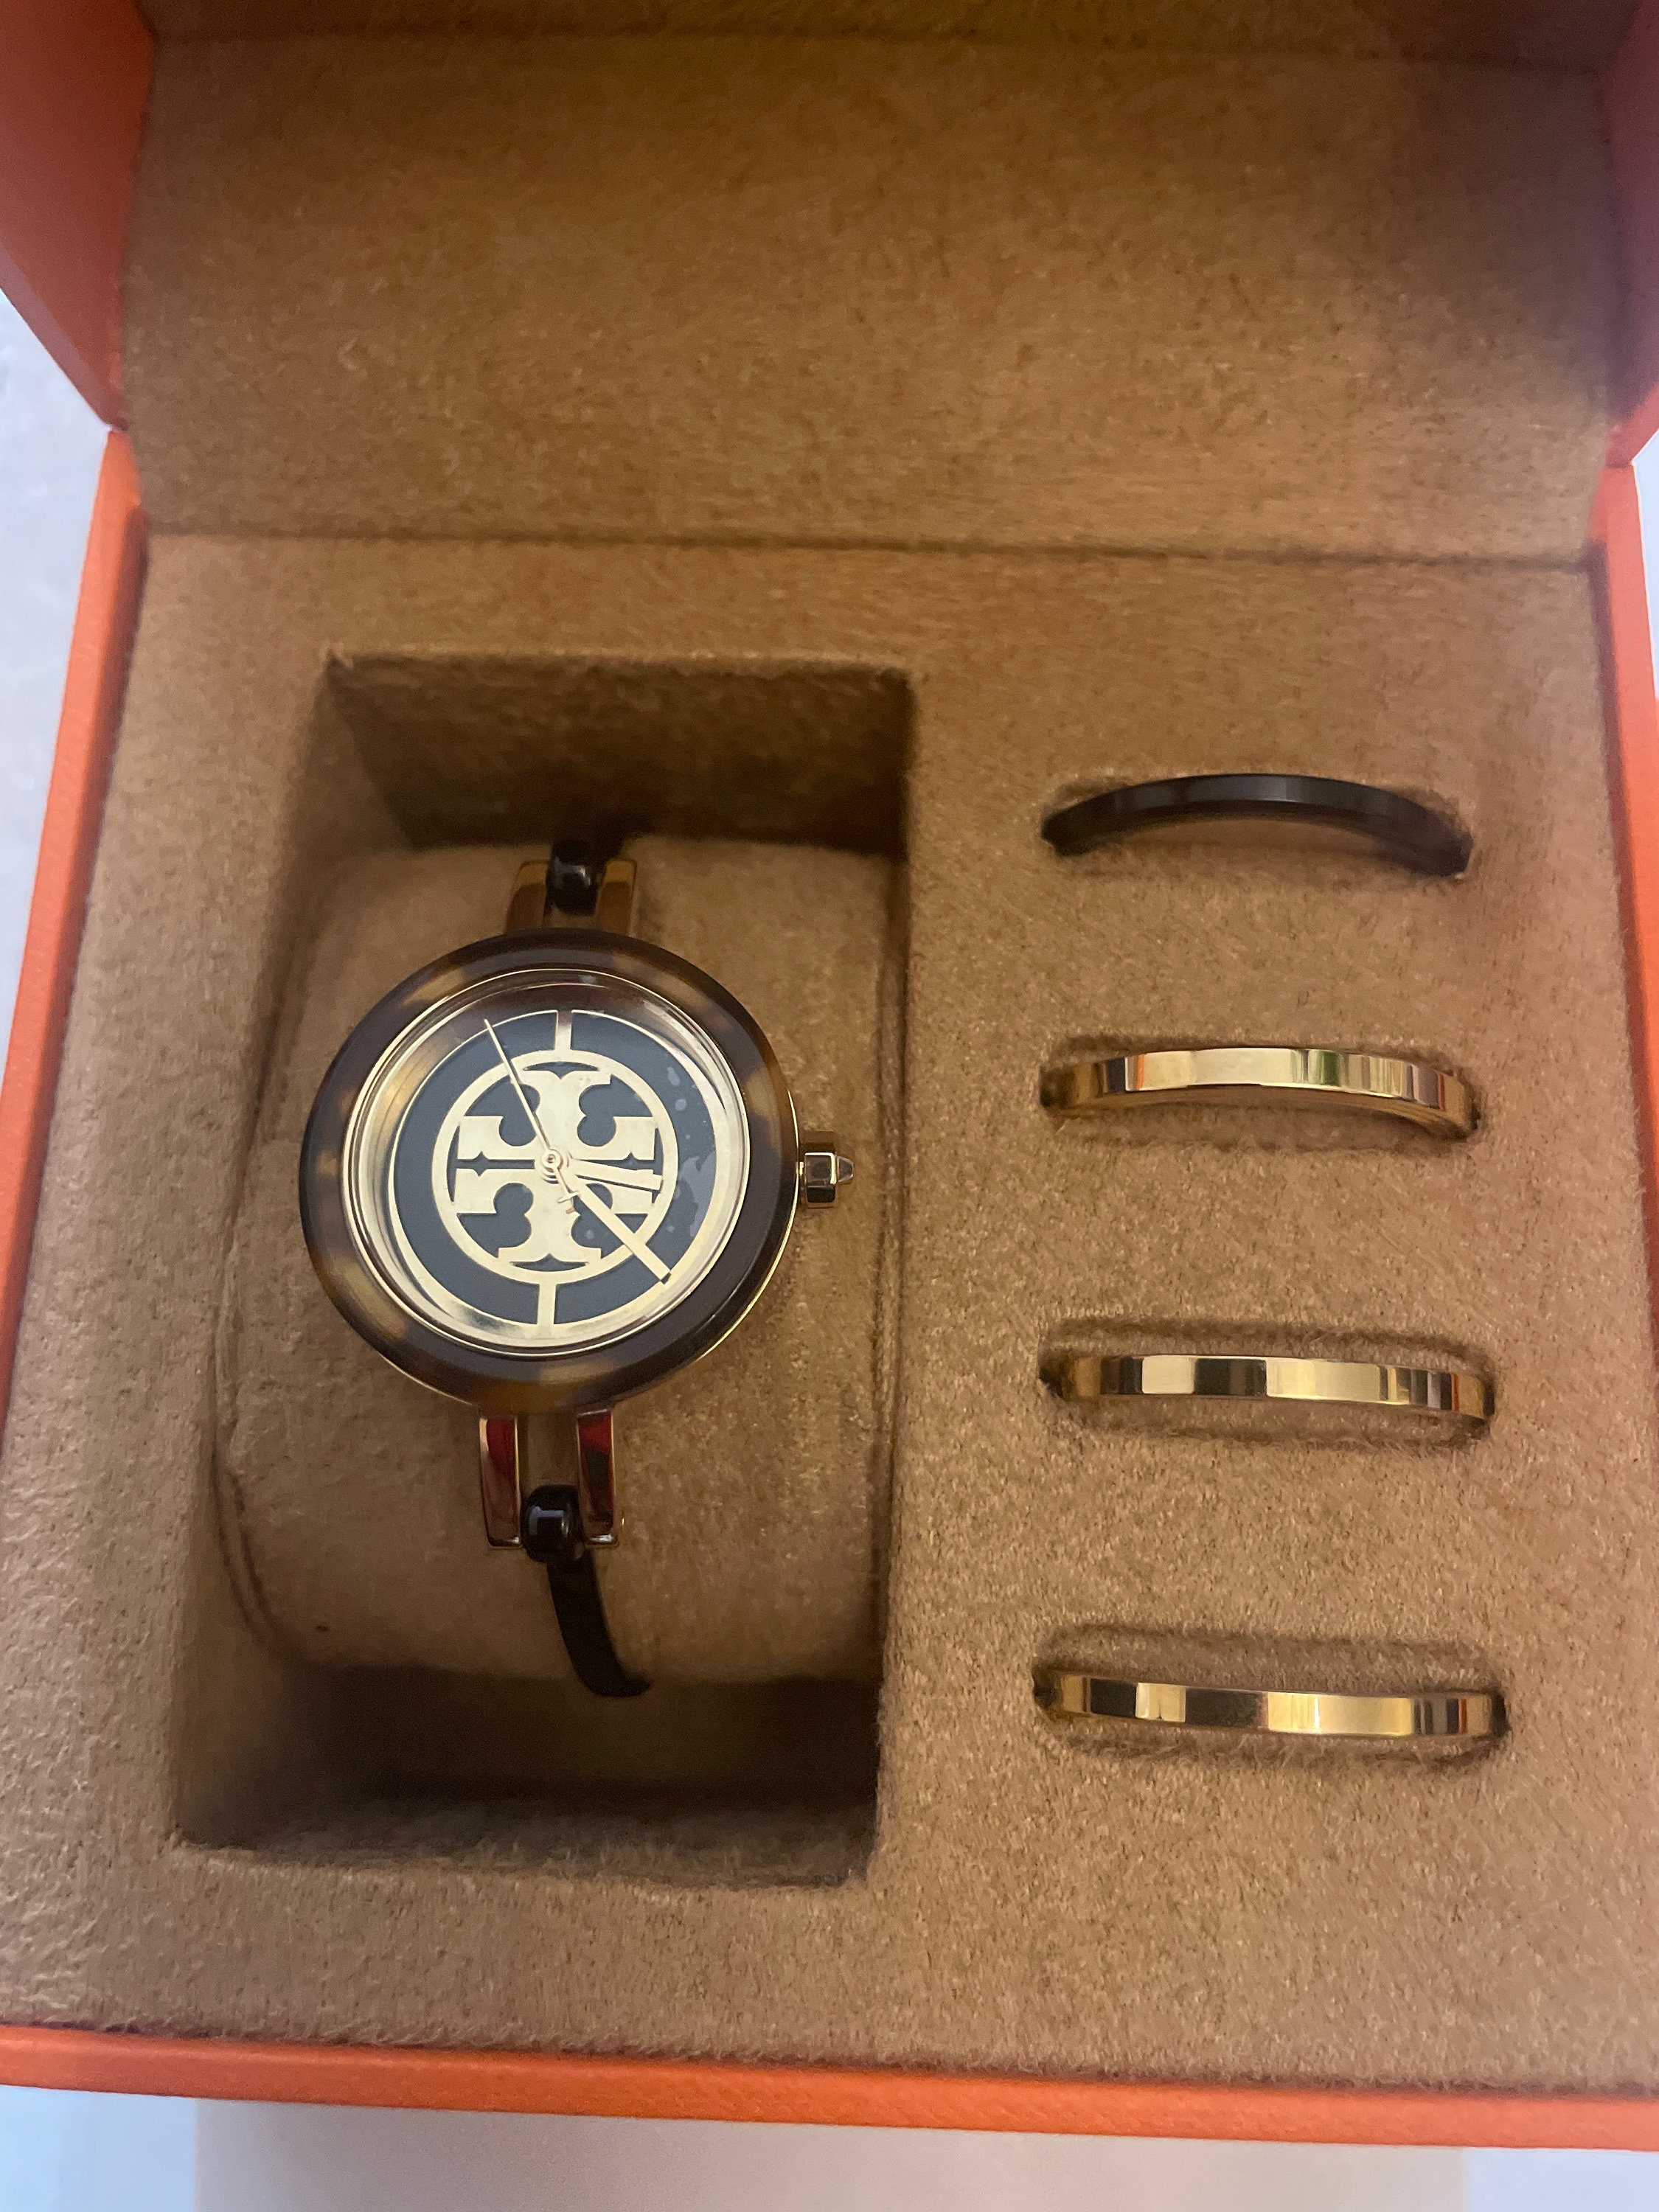 Tory Burch Miller Band For Apple Watch®, Gold-tone Stainless Steel in Black